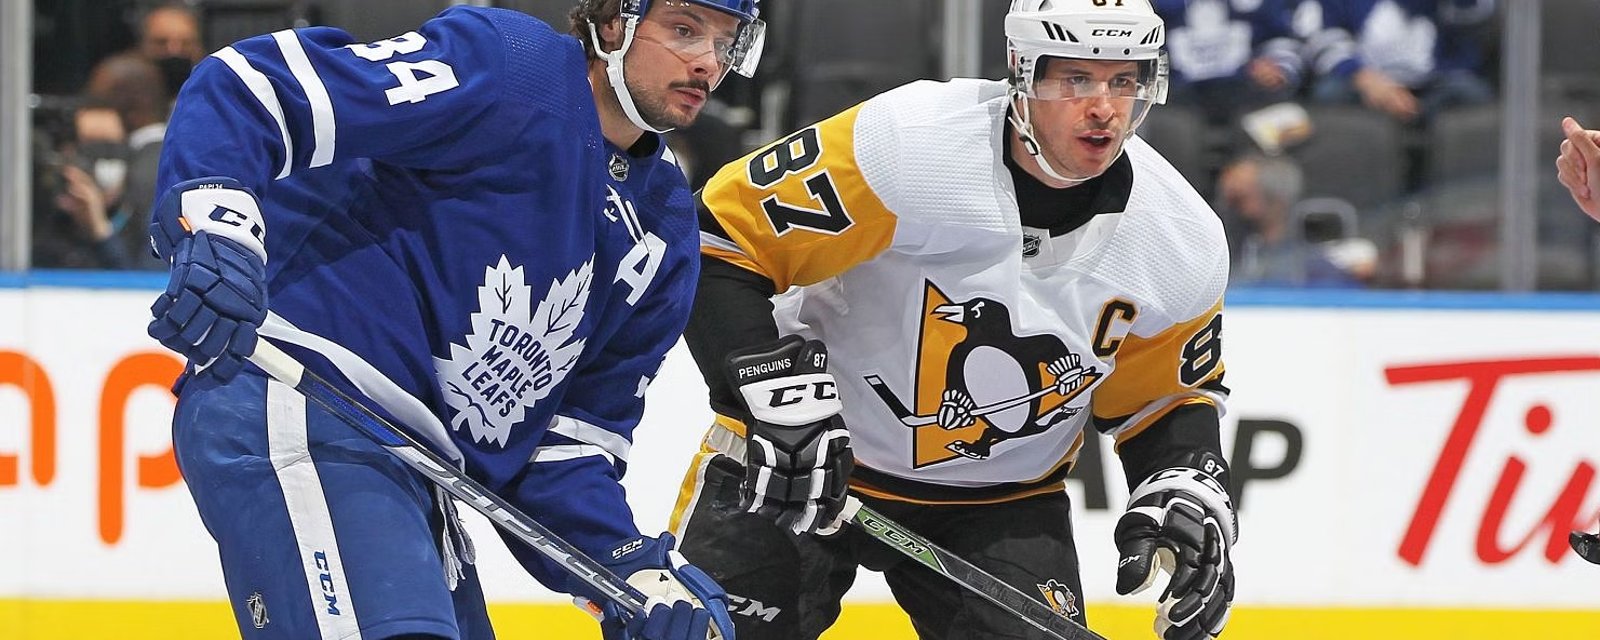 Insider shocks with scenario that moves Sidney Crosby to Toronto!